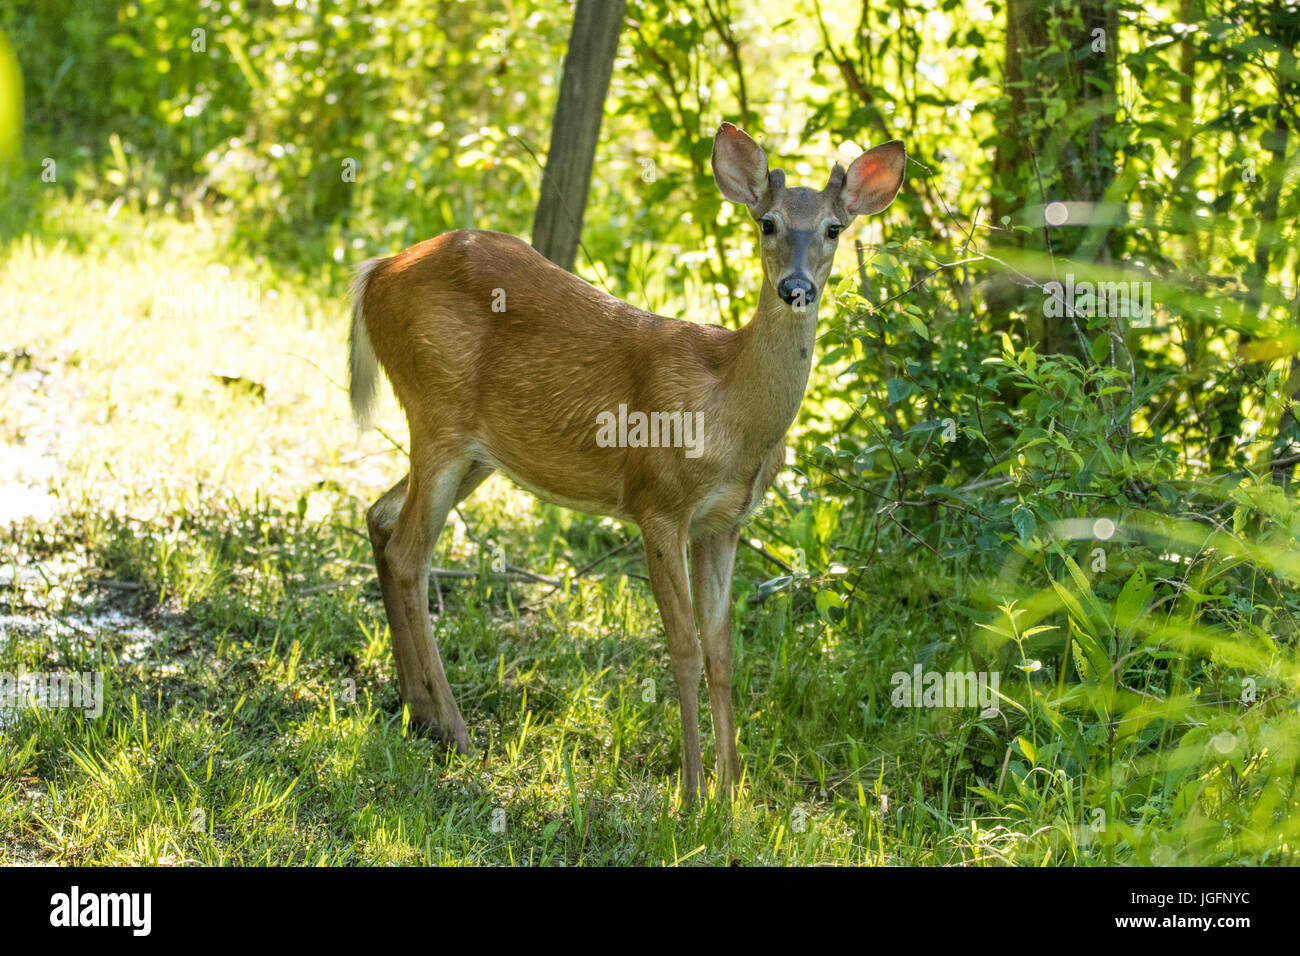 A young whitetail deer stares at the camera. Stock Photo